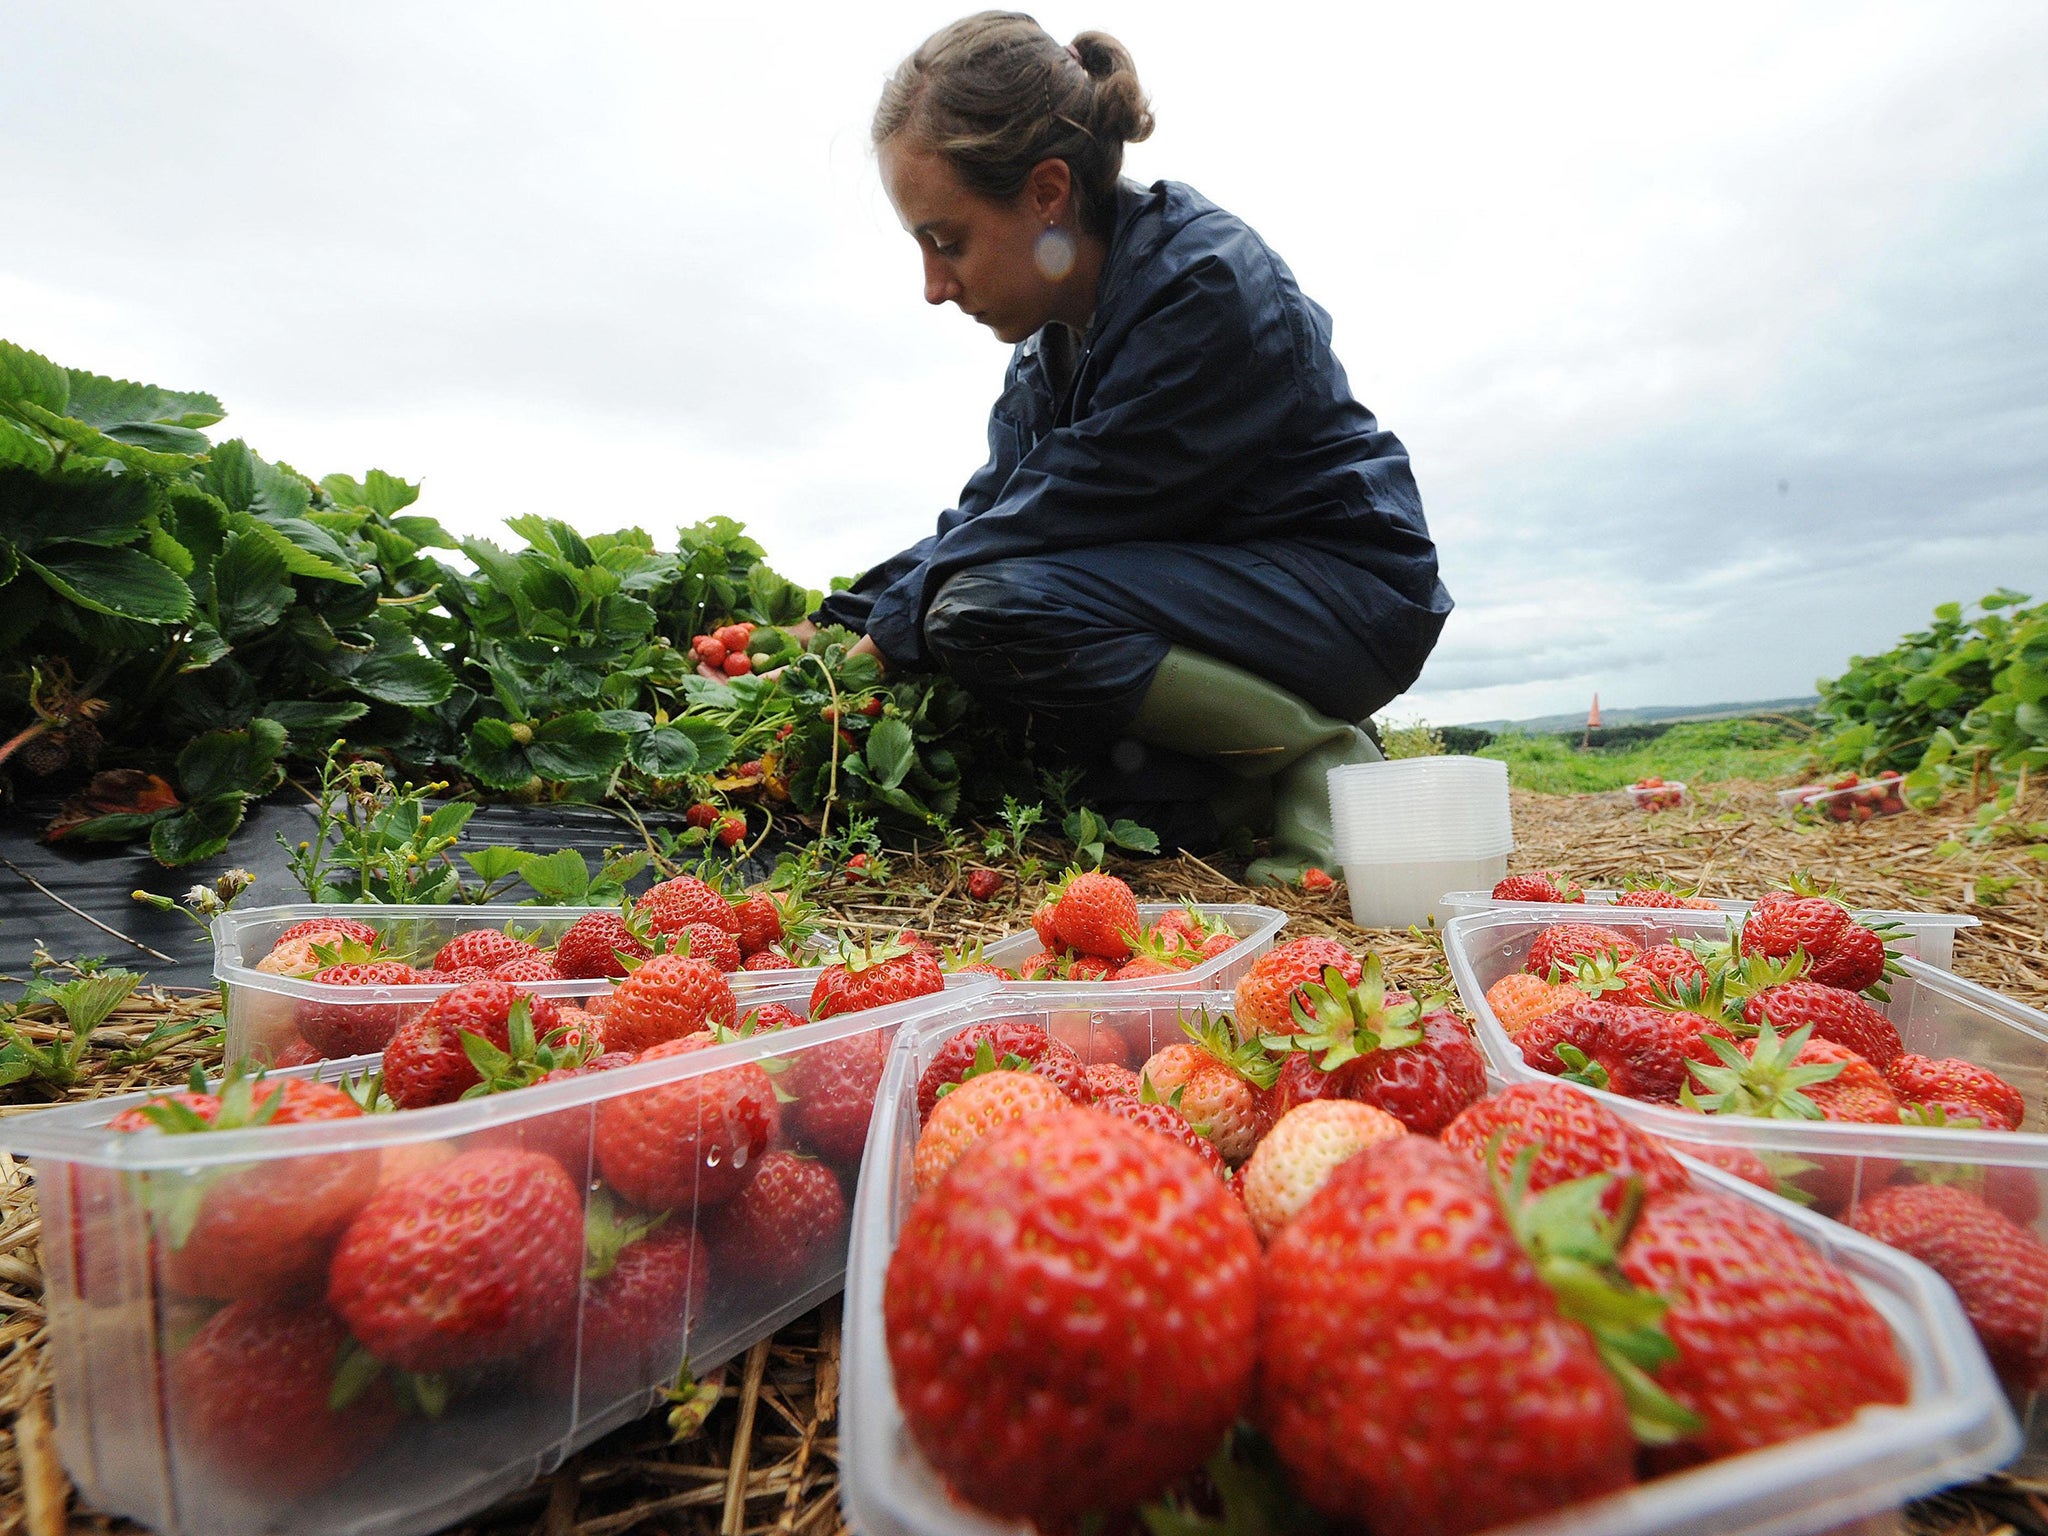 Around 95 per cent of the 29,000 seasonal labourers who pick fruit in the UK are from the EU, with most coming from Bulgaria and Romania